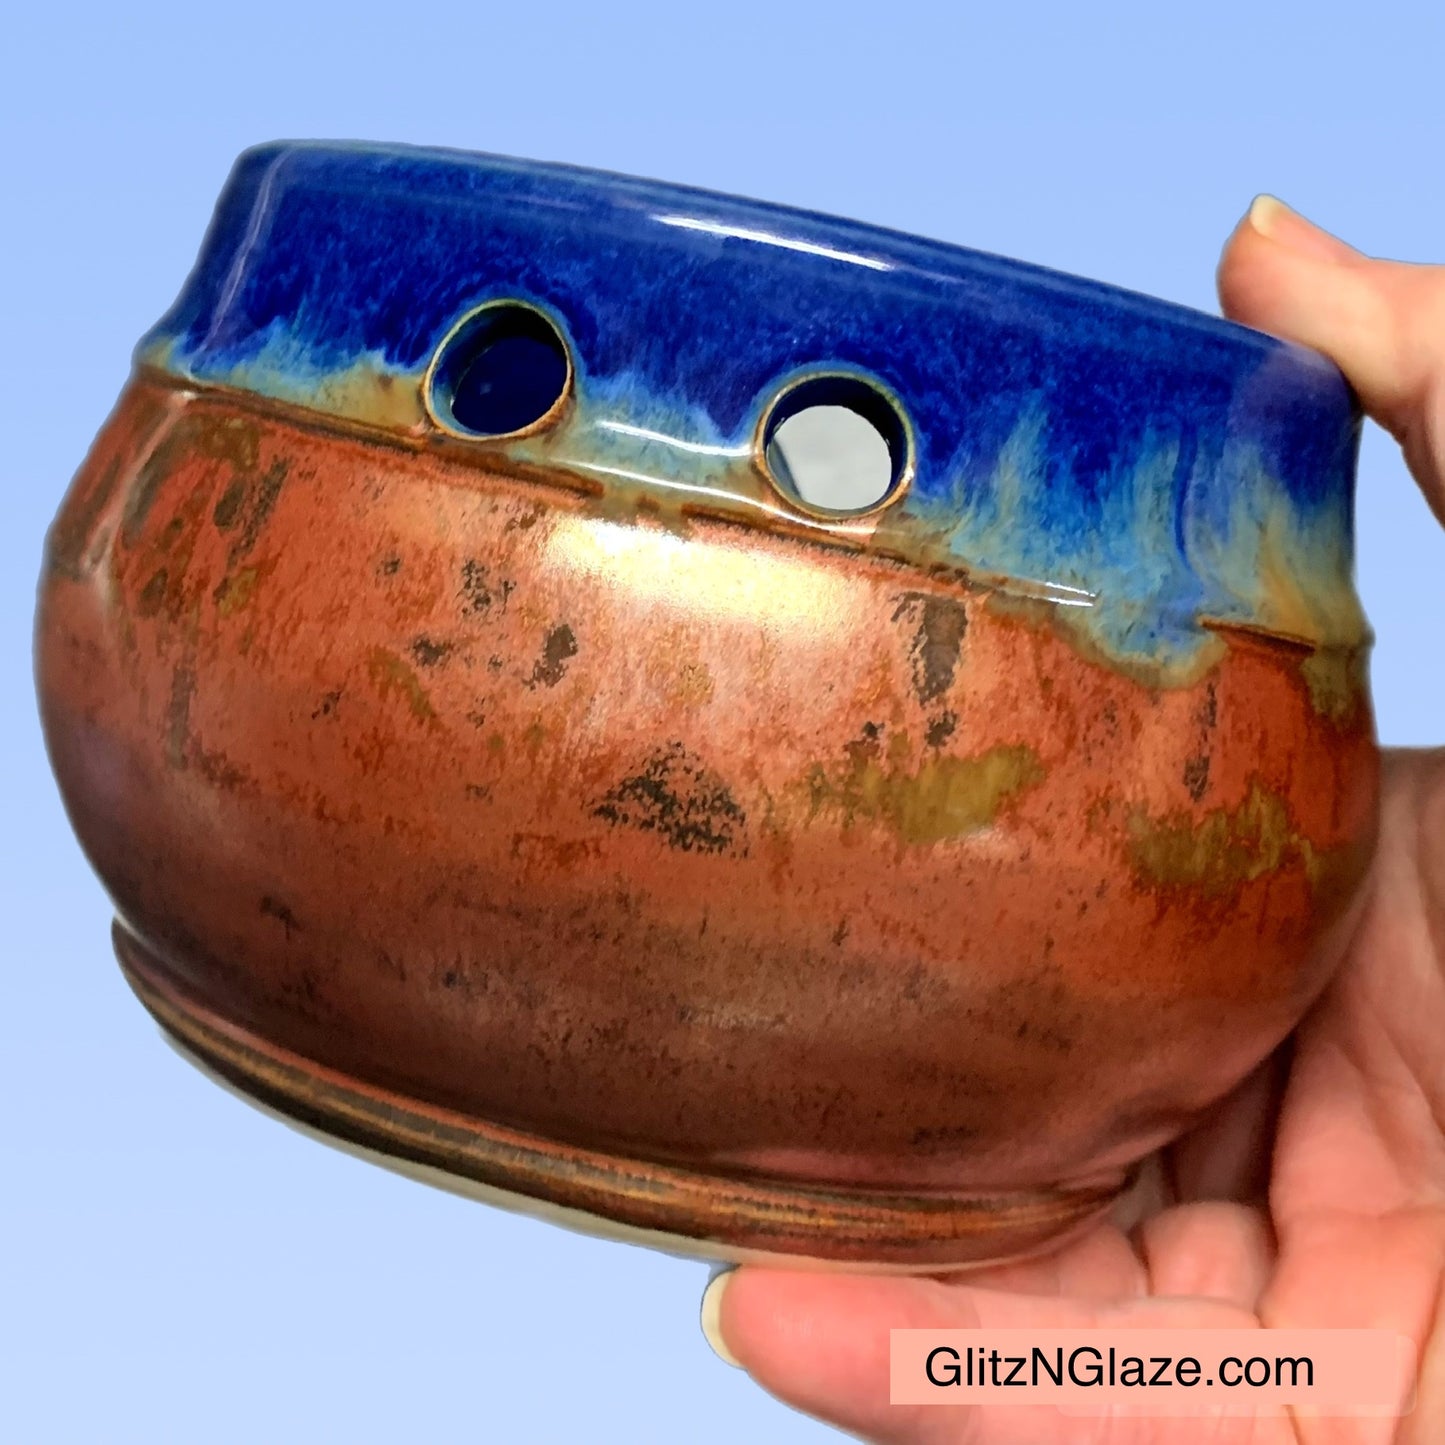 Copper and Blue Yarn Bowl